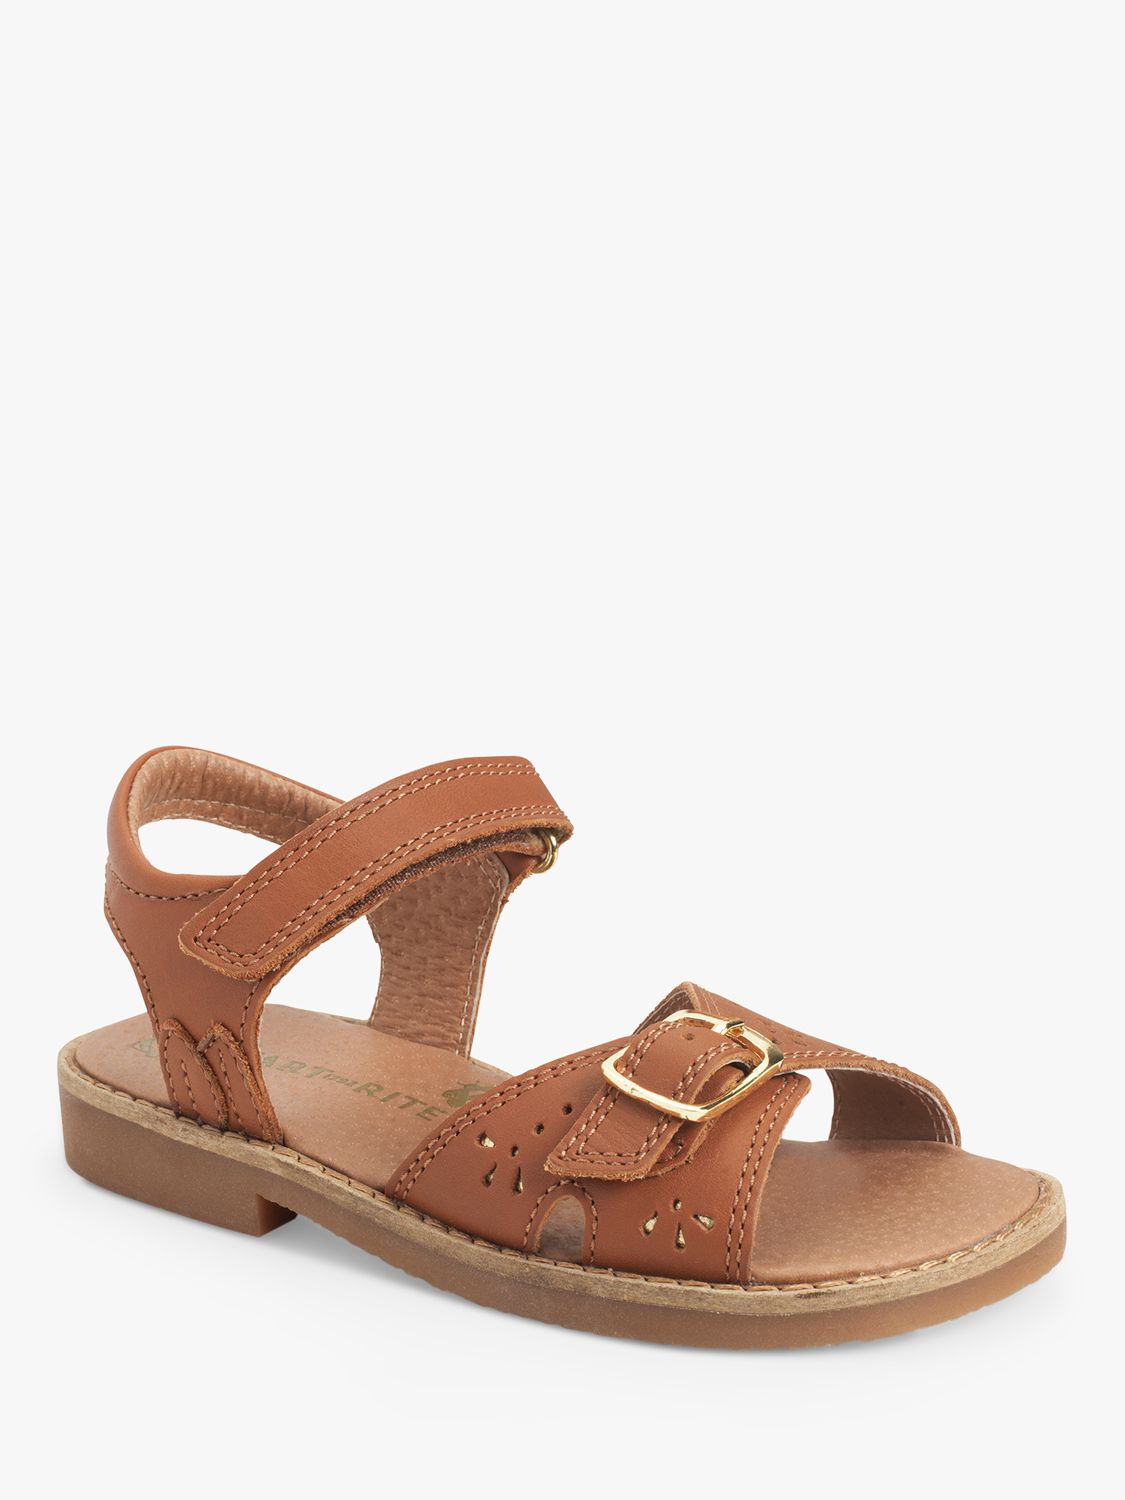 Start-Rite Kids' Holiday Leather Sandals, Tan Leather, 7F Jnr